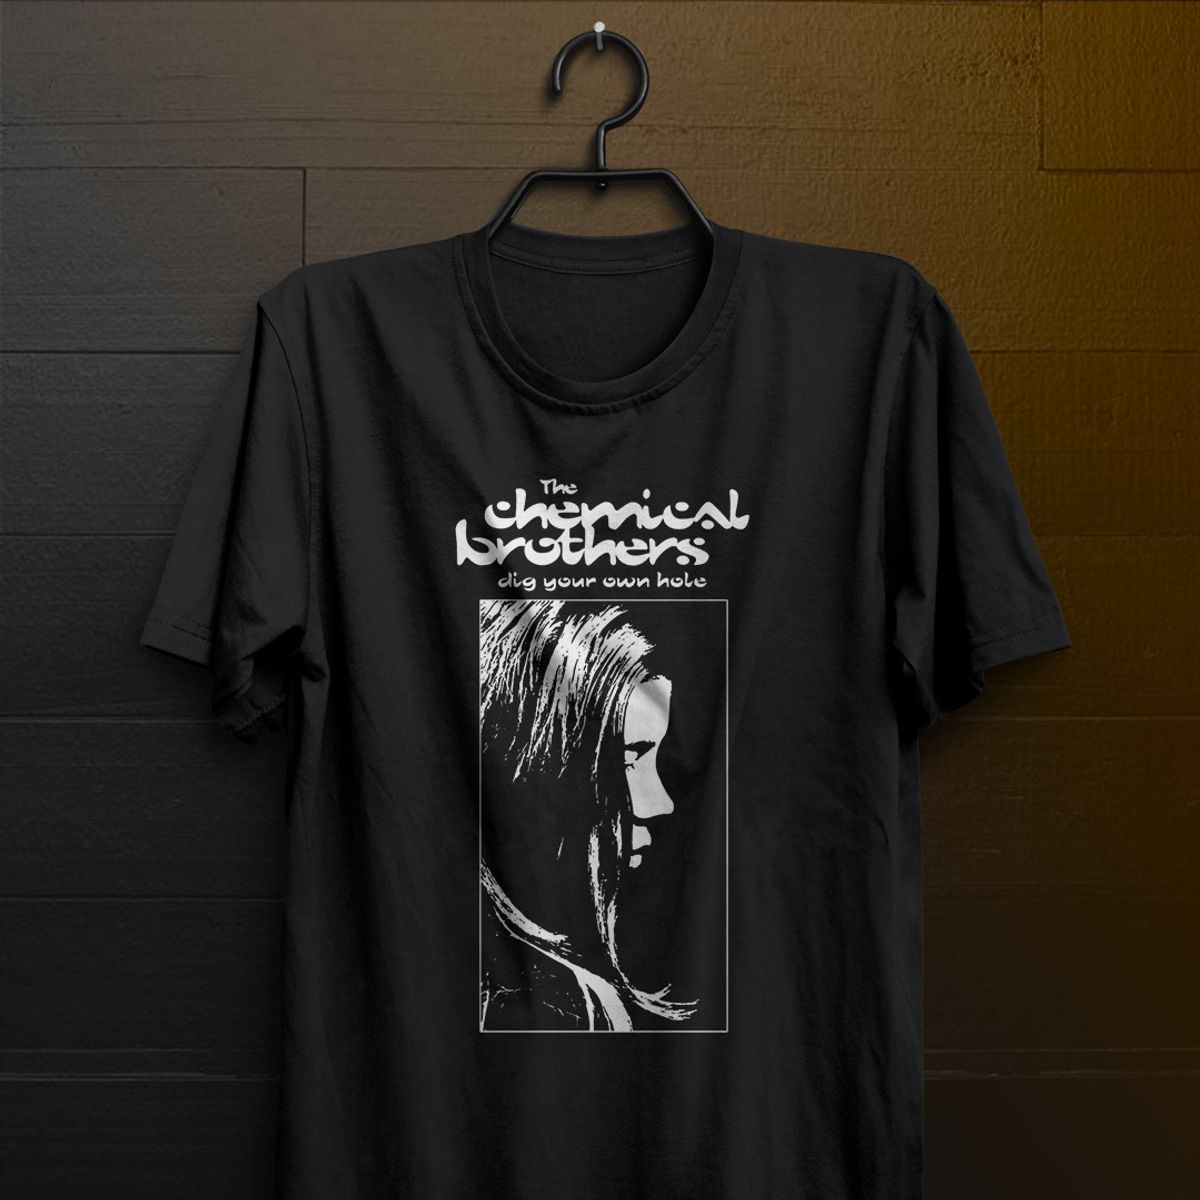 Nome do produto: Camiseta The Chemical Brothers - Dig Your Own Hole - Logo Branco